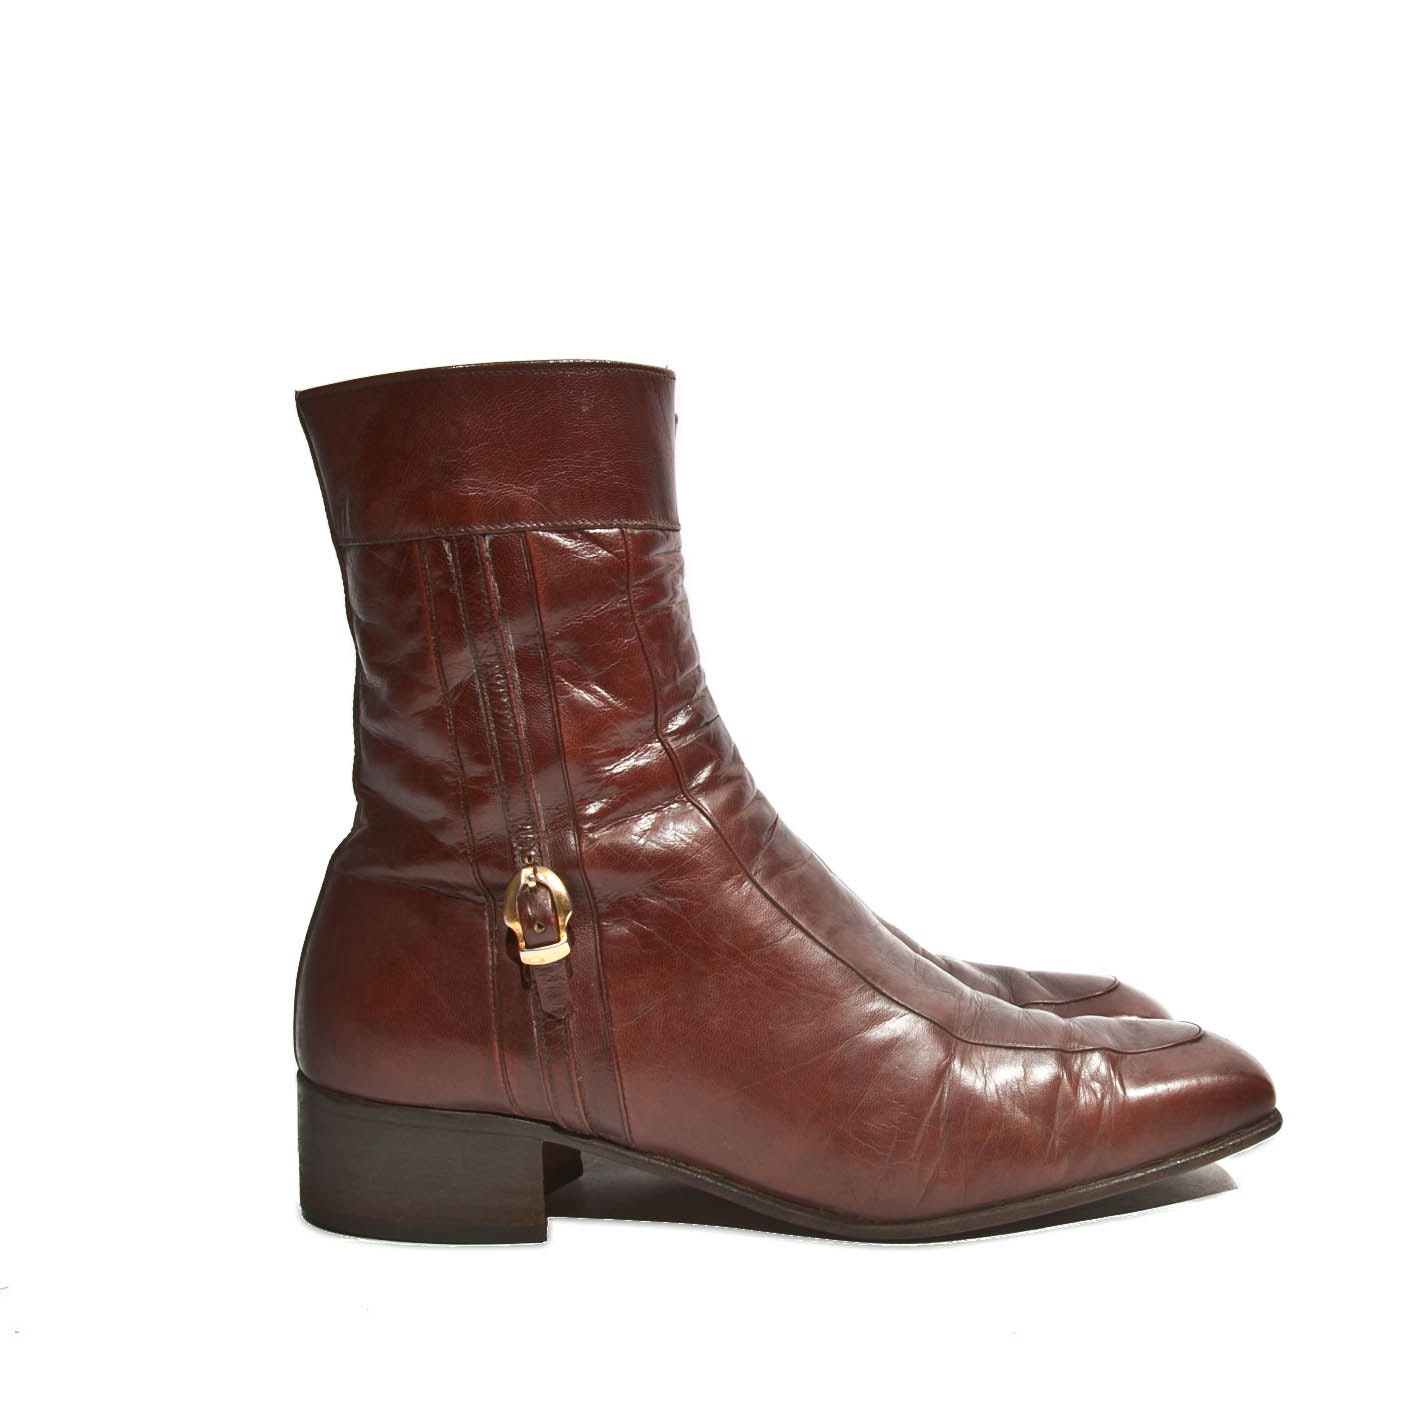 7.5 D Men's Tall Leather Zipper Boots Cinnamon by NashDryGoods